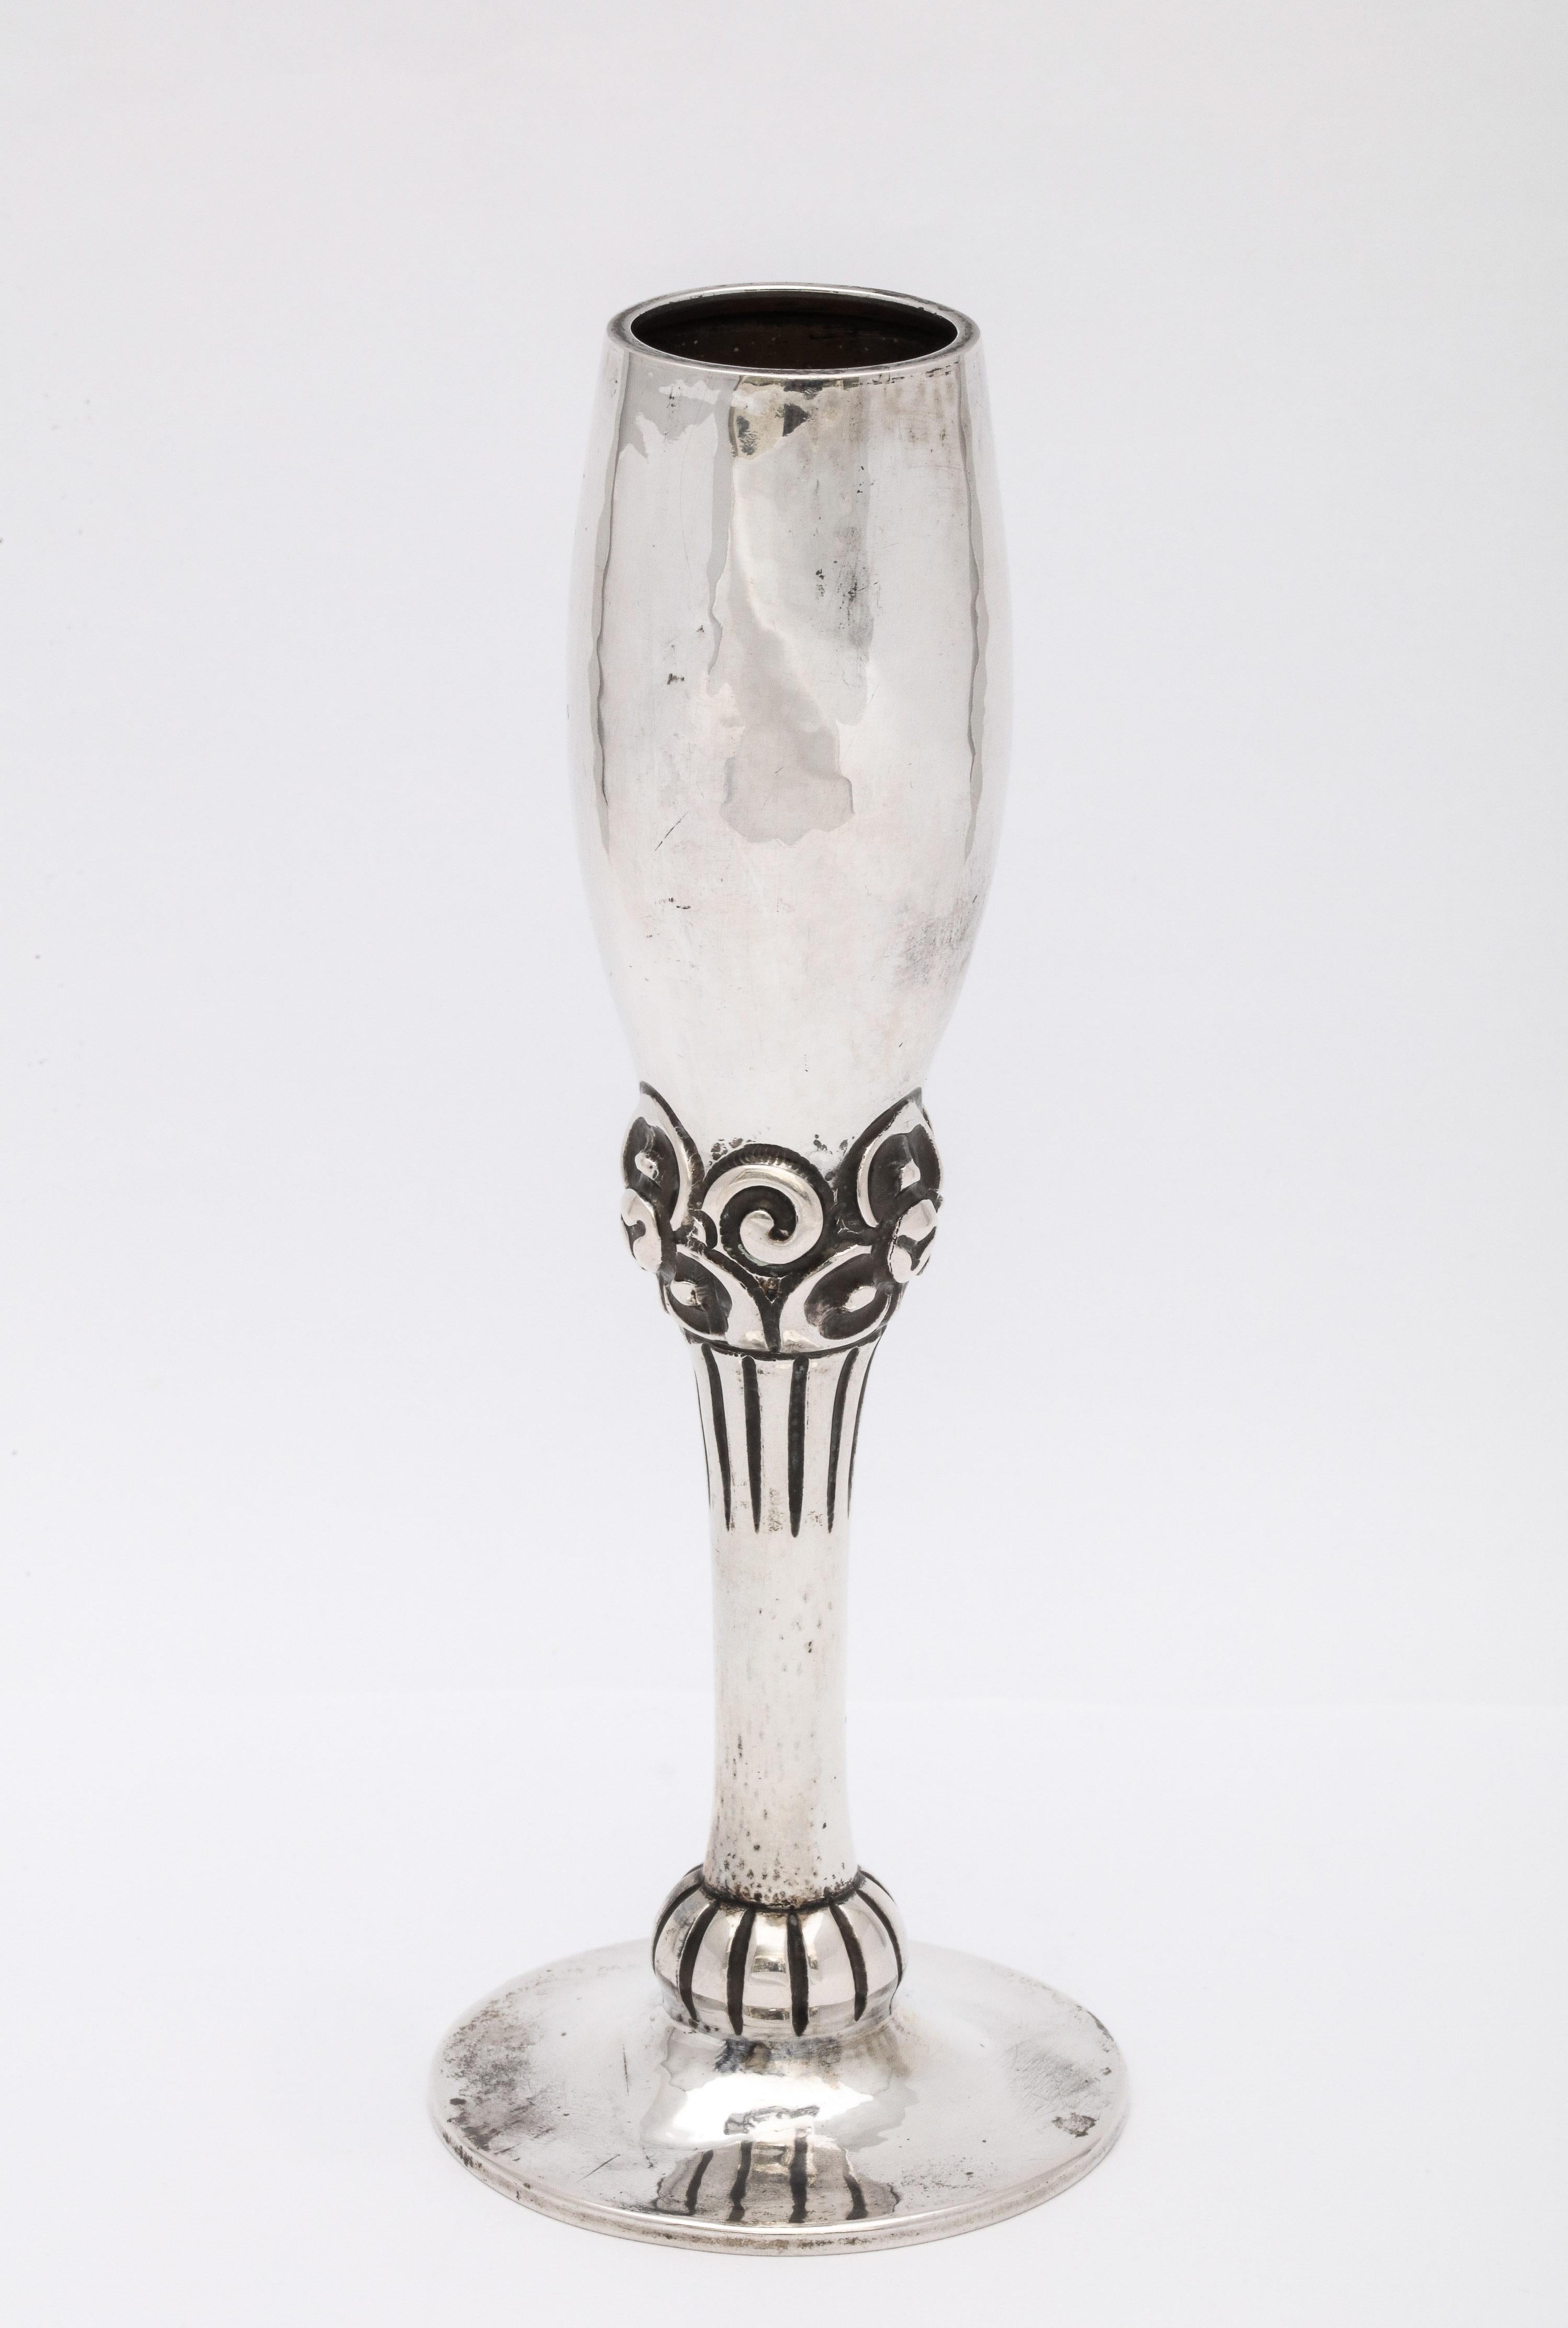 Art Deco, Continental silver (.830) bud vase, Bergen, Norway, circa 1920s, Magnus Aase, maker. Measures 6 1/2 inches high x 2 1/2 inches diameter at widest point x 1 1/4 inches diameter across opening. Upper portion is lightly hammered. Weighs 2.290